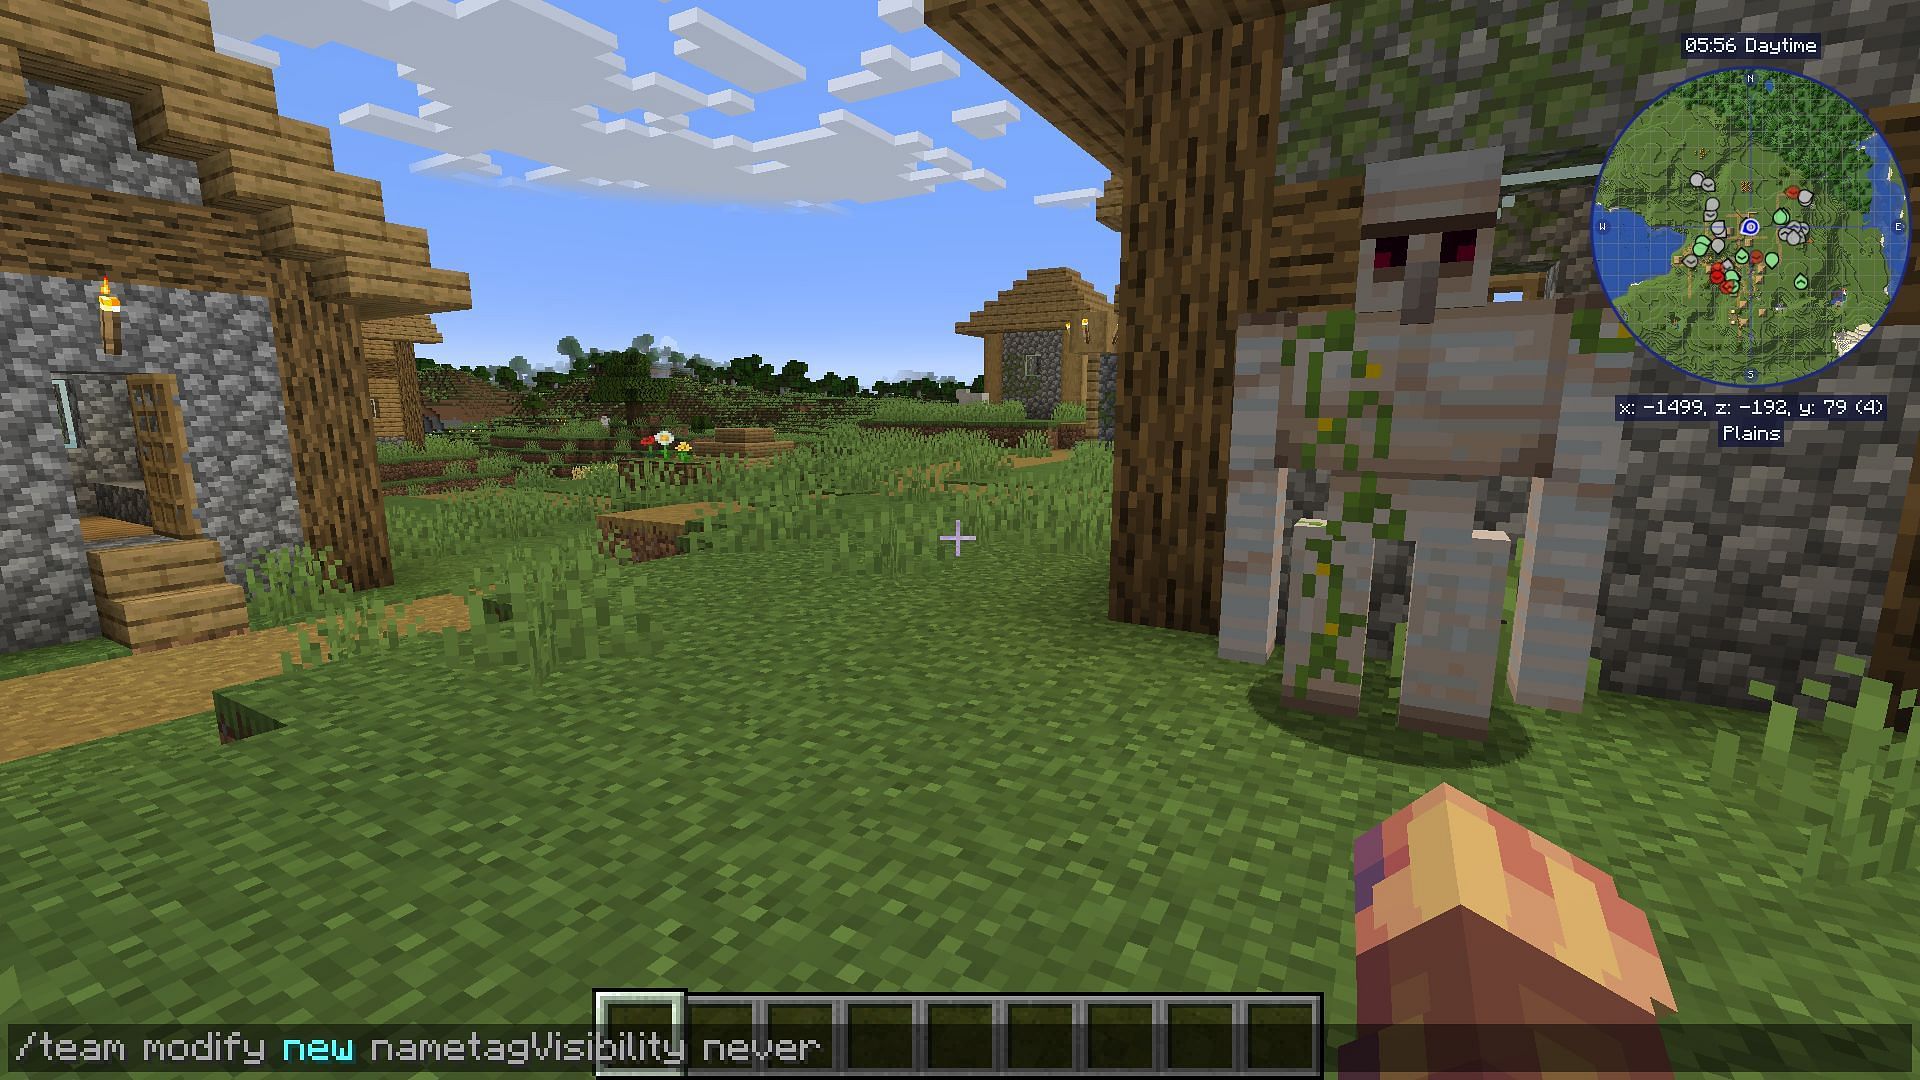 Using commands, Minecraft players can remove nametags for all or some players in a world (Image via Mojang)